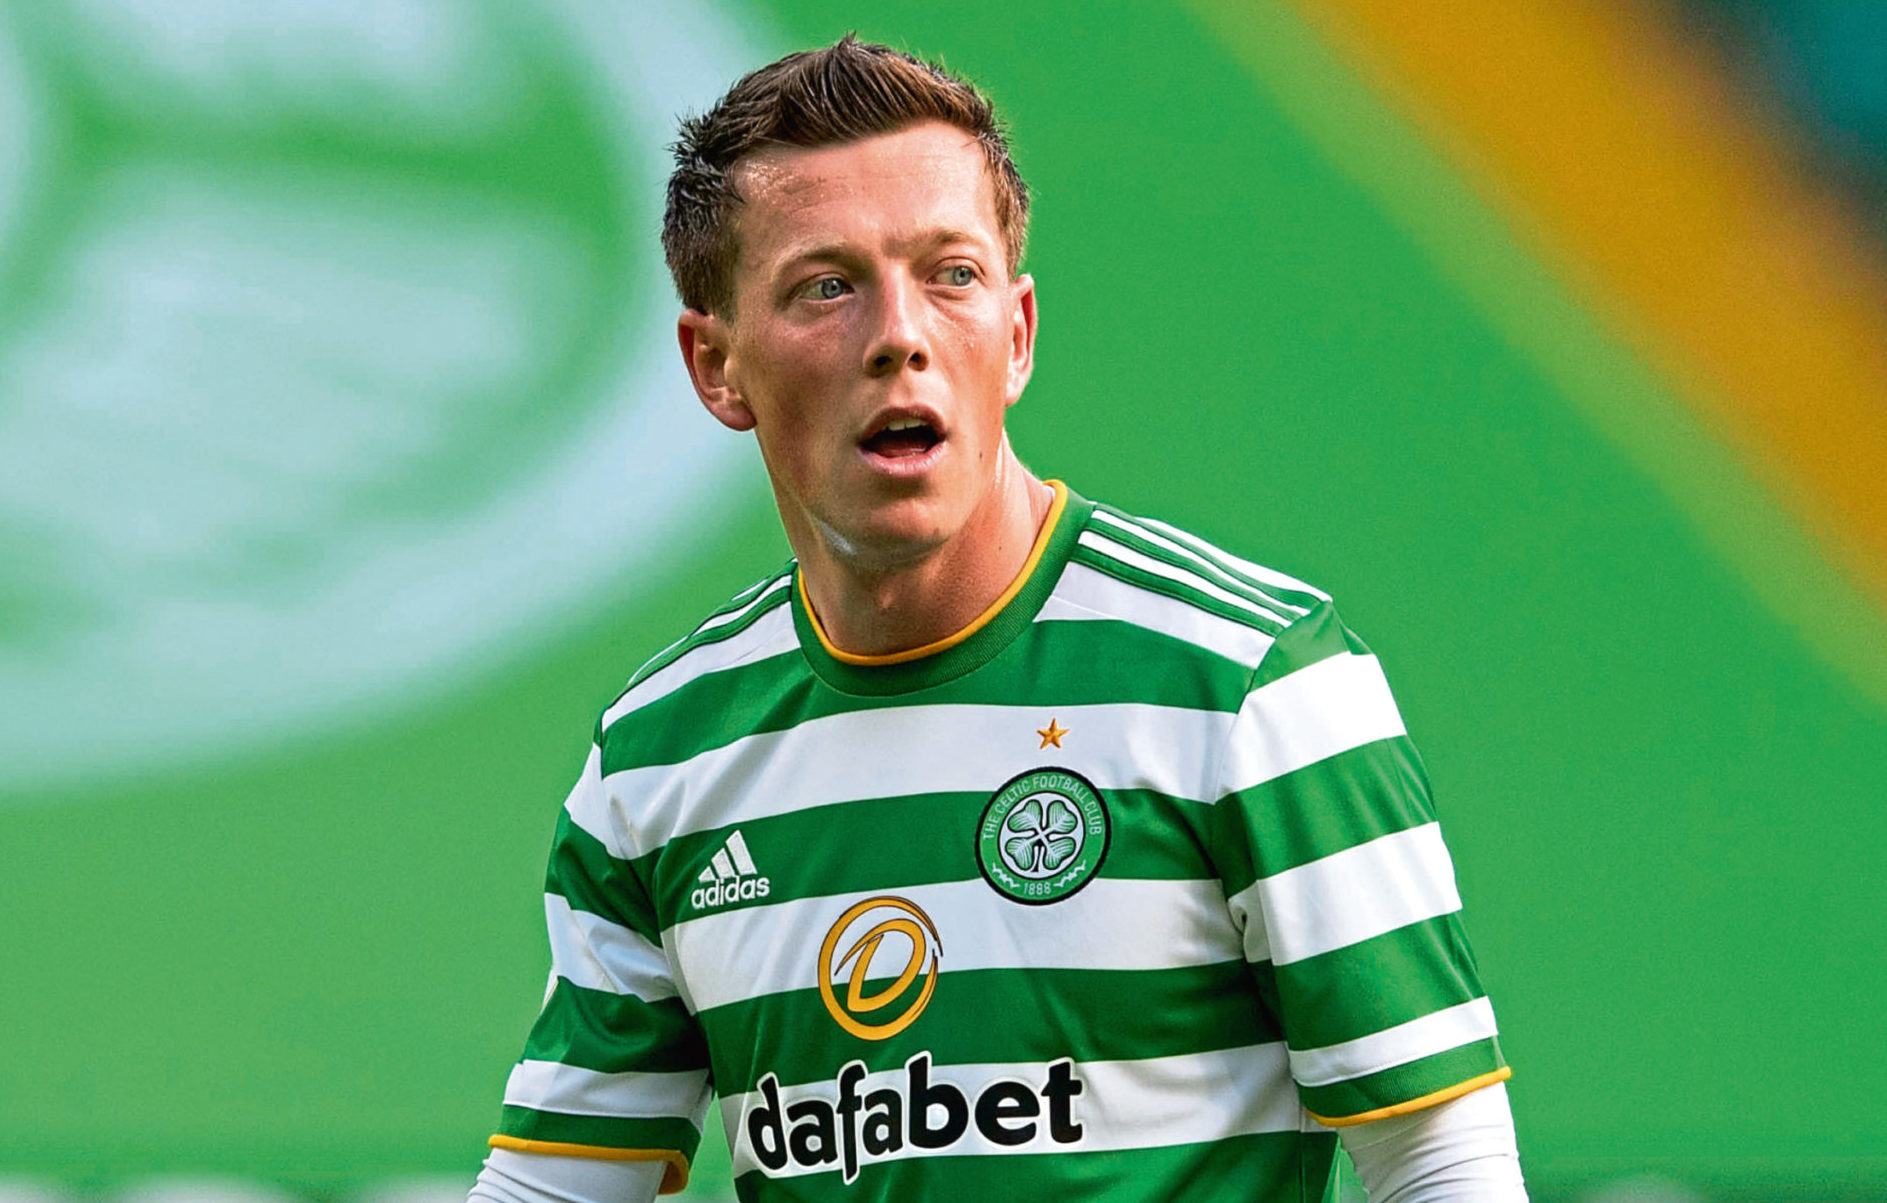 Callum McGregor has become a hugely influential player in the six years since he grabbed his debut goal for the Celts